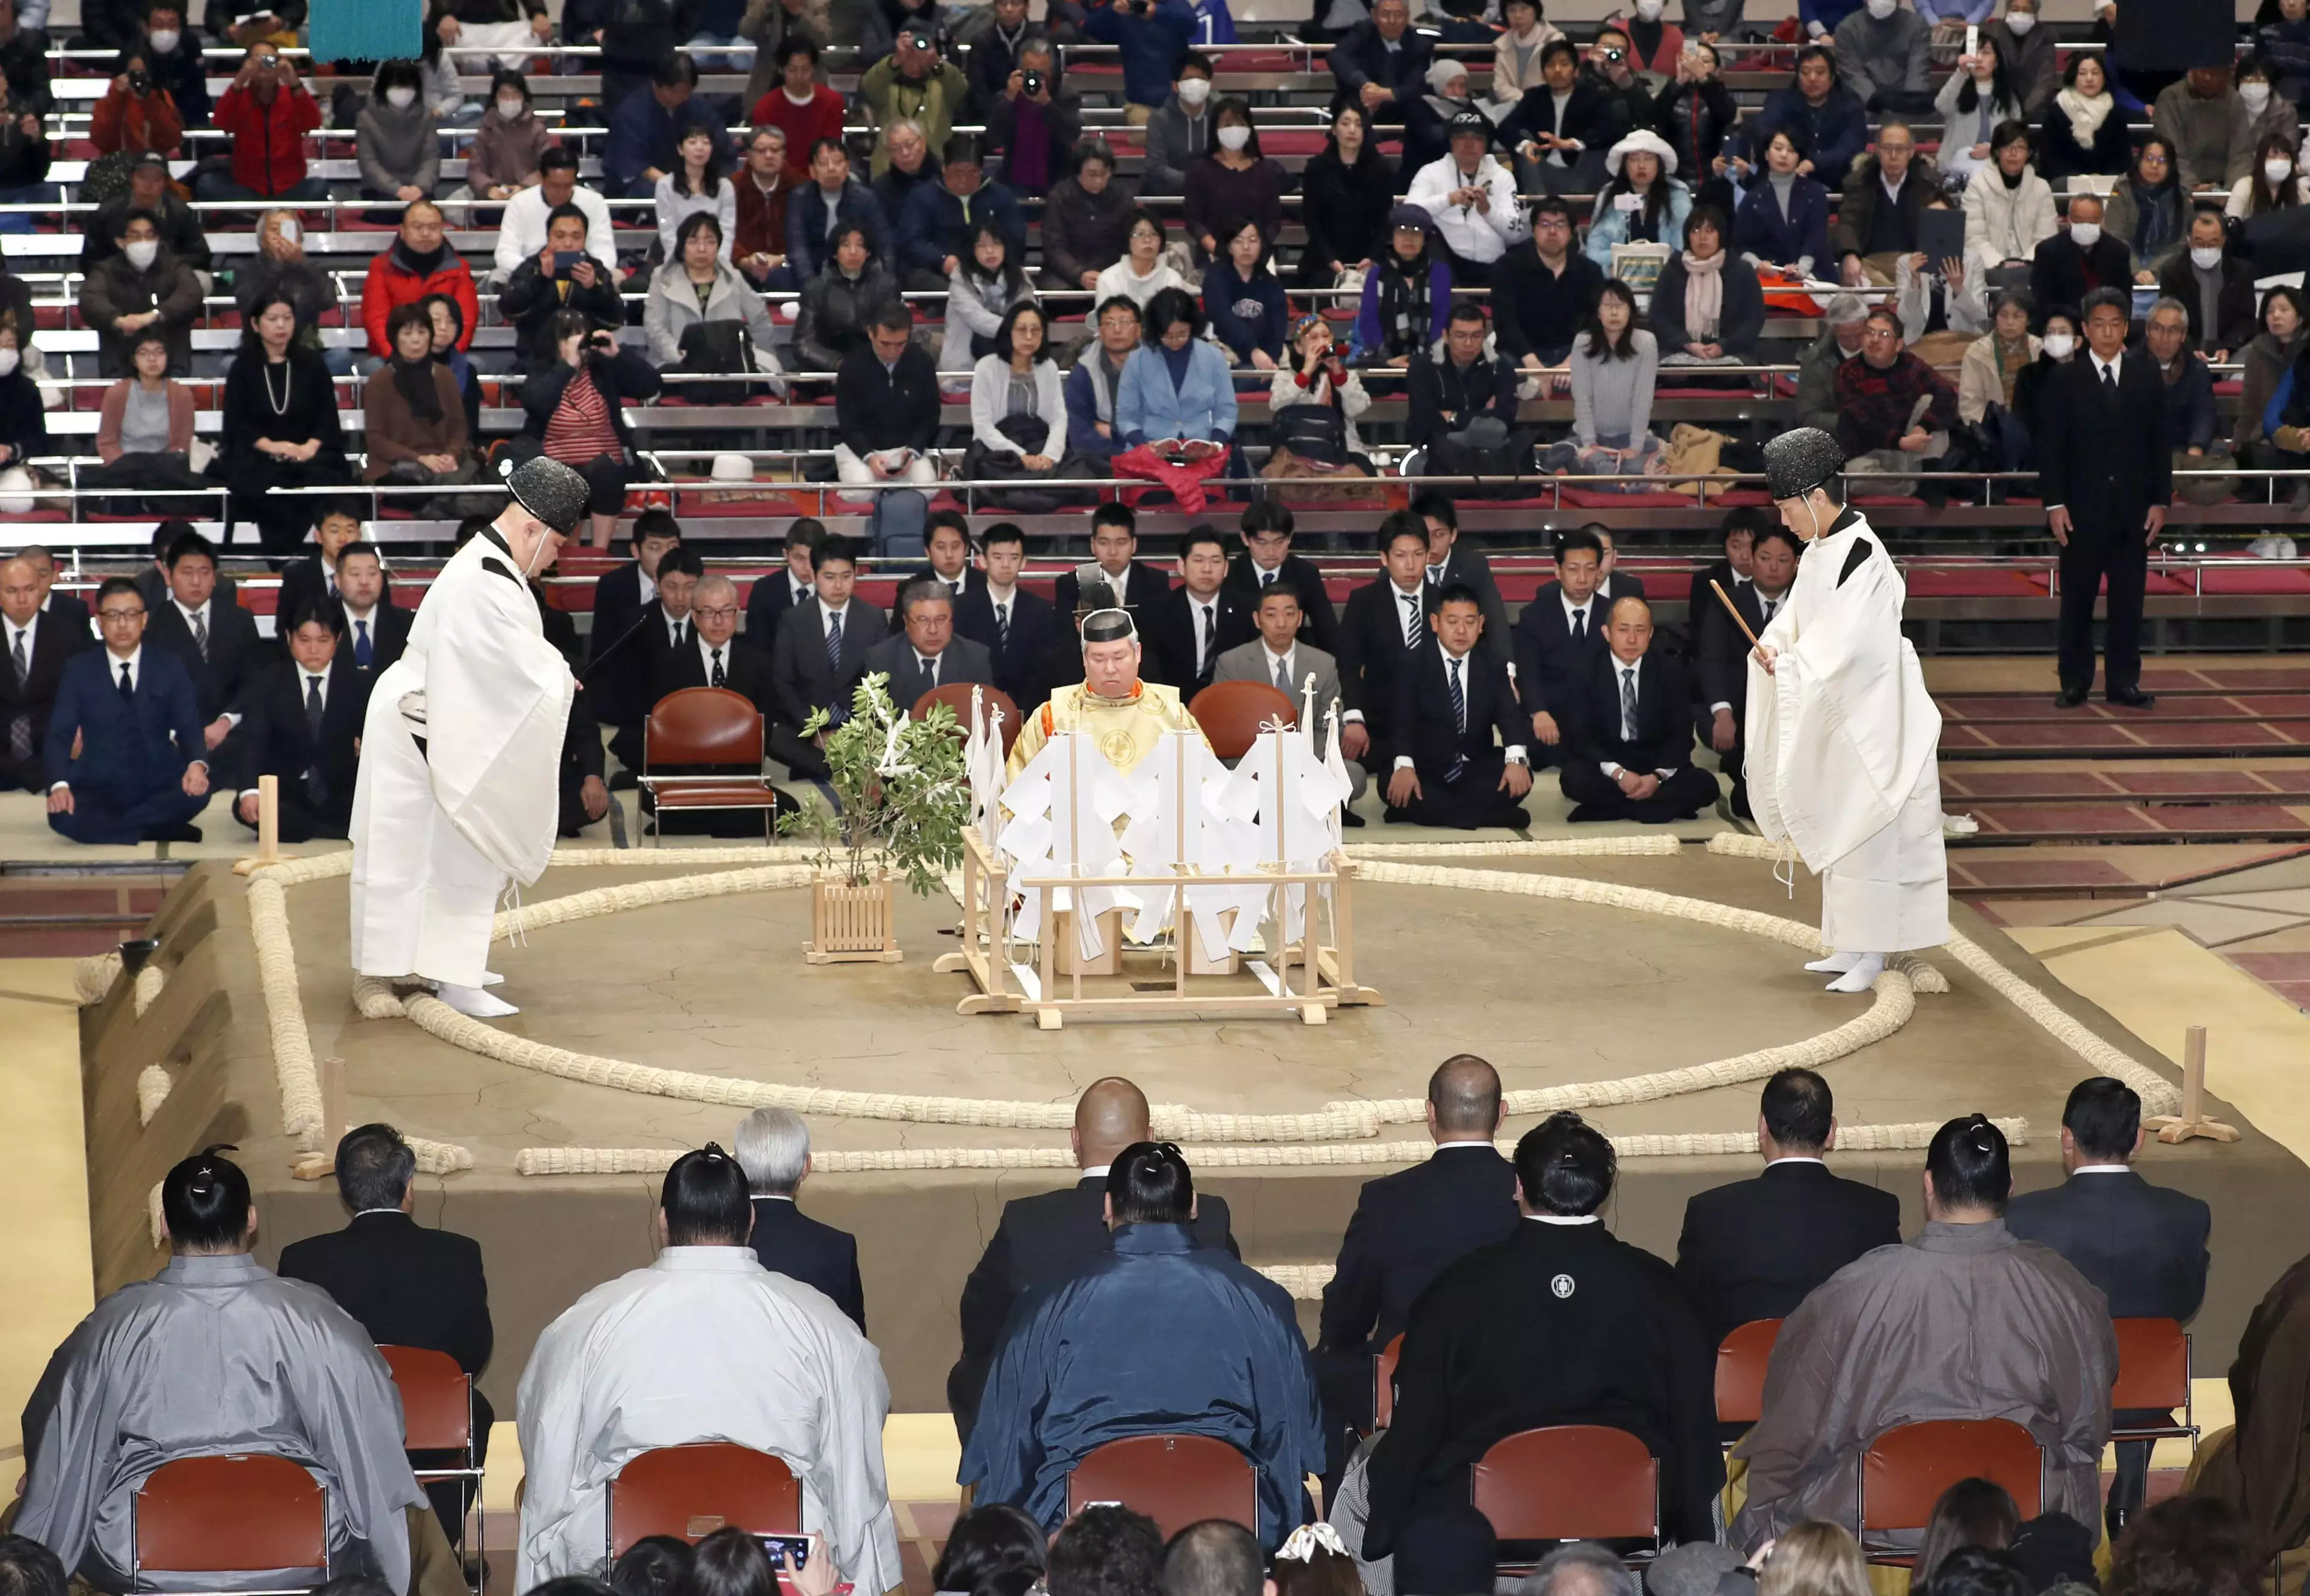 Shinto ceremony blessing the ring.